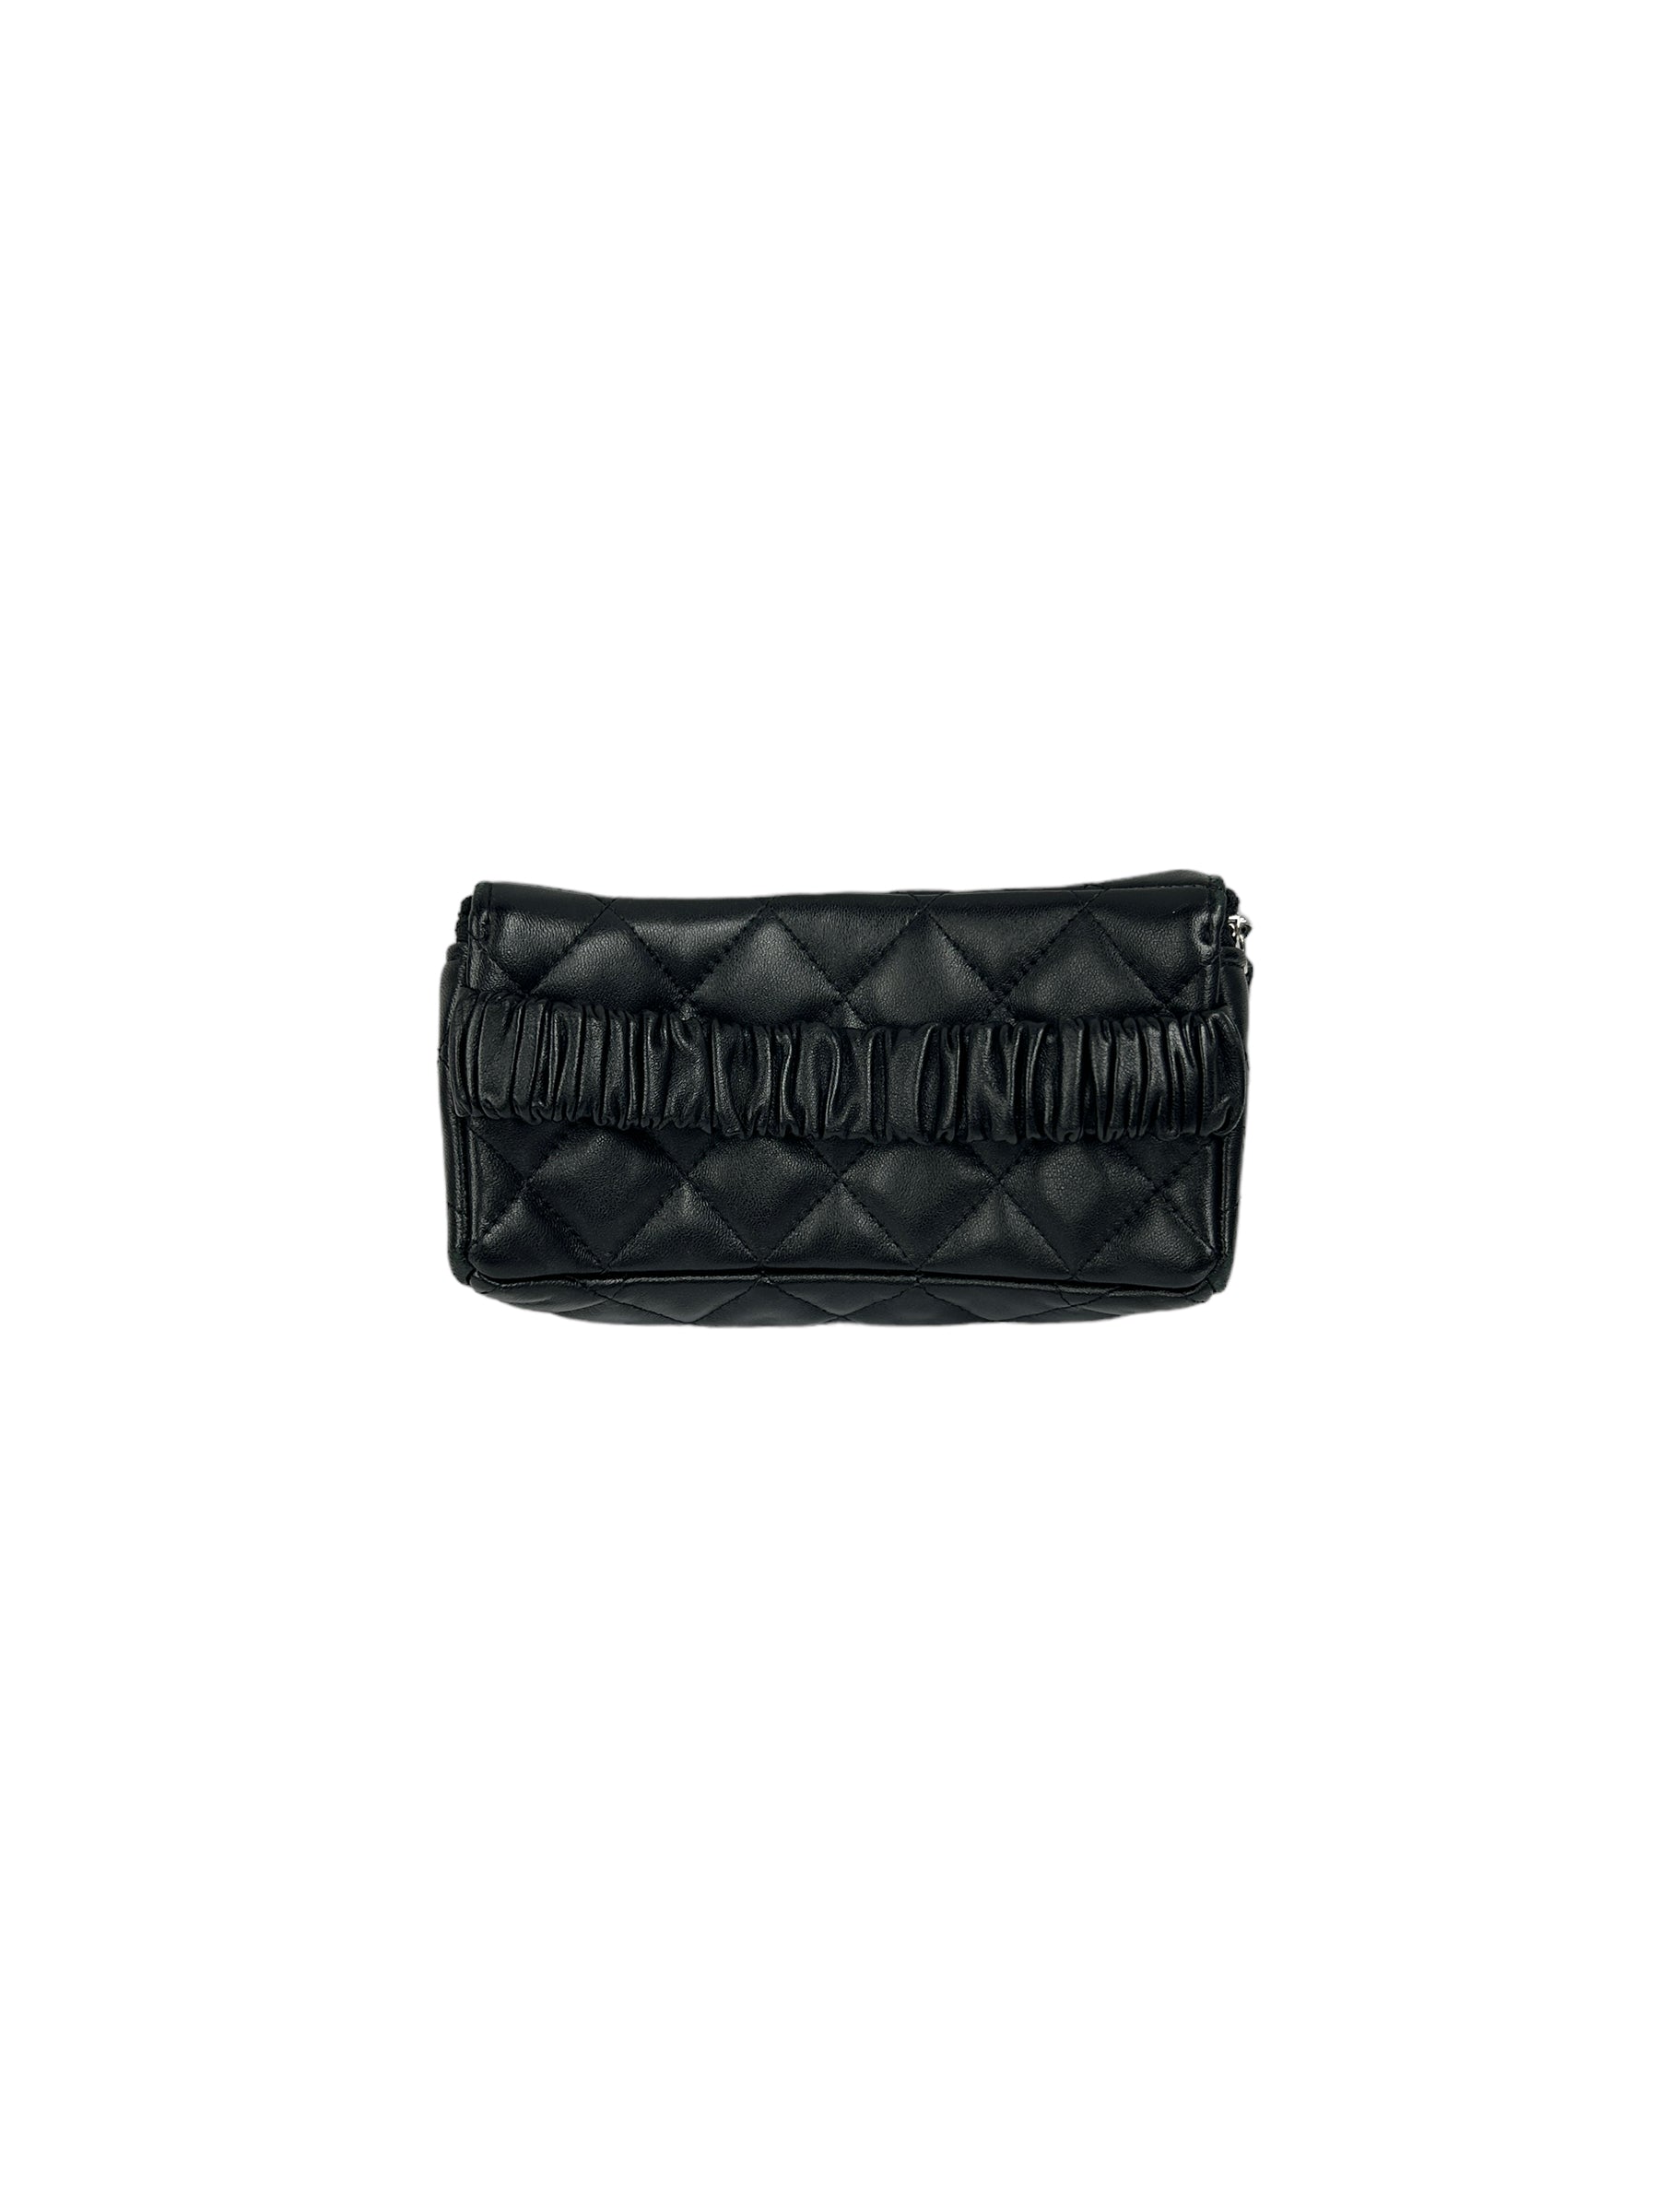 Black Quilted Lambskin Mini Arm Band Pouch w/SHW